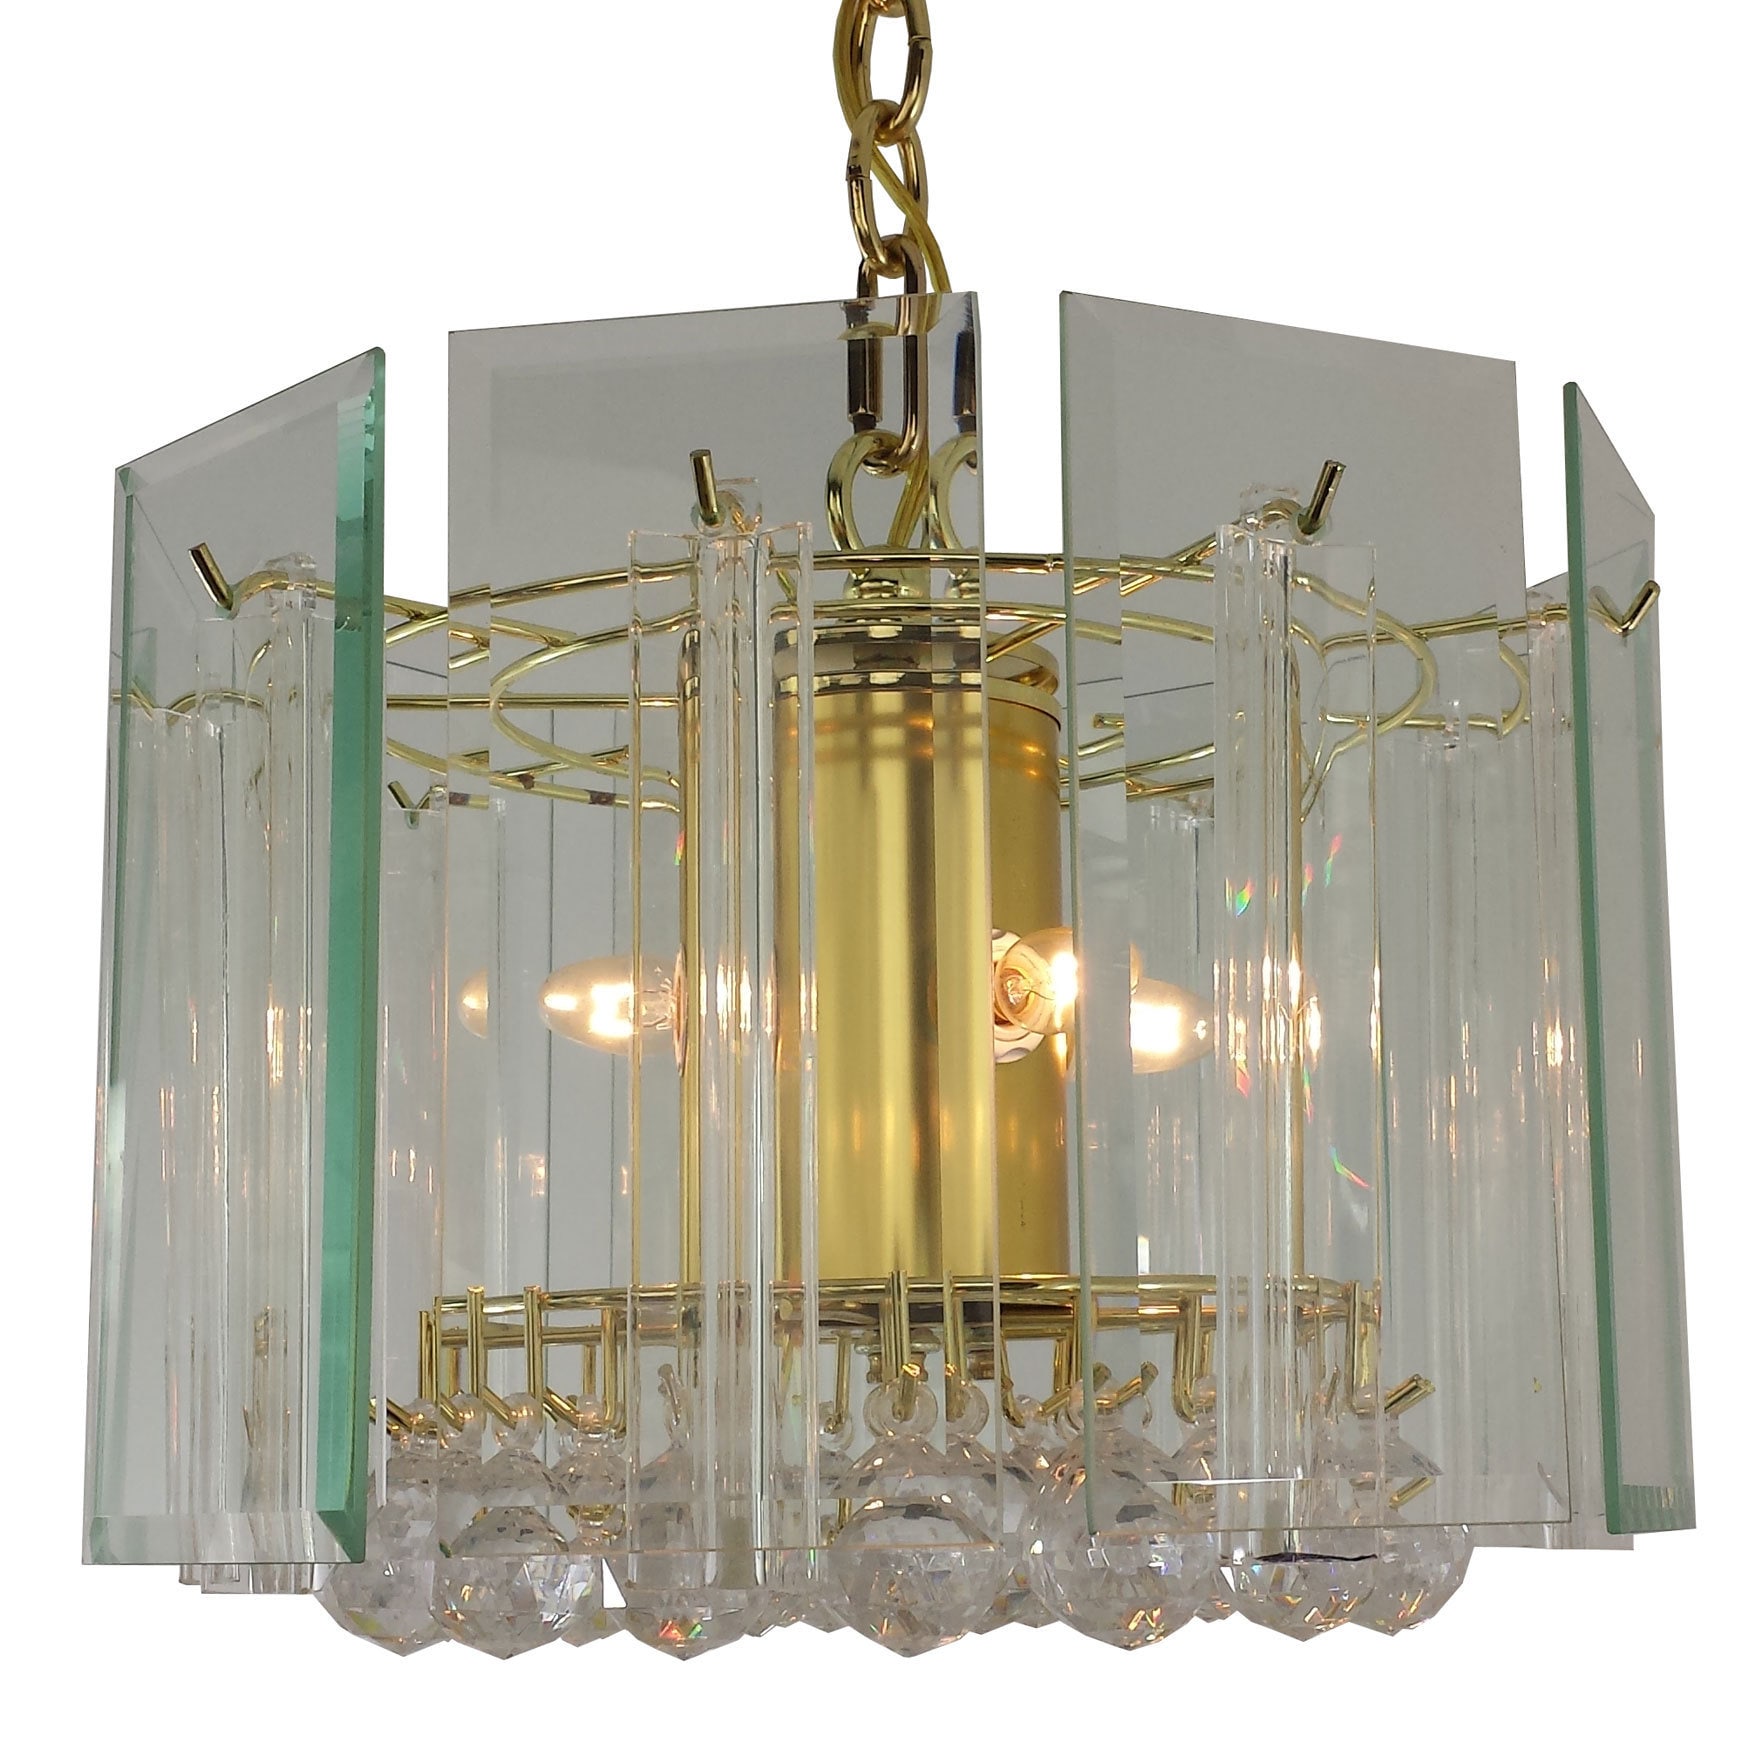 Contemporary 4 light Chandelier With Brass Finish